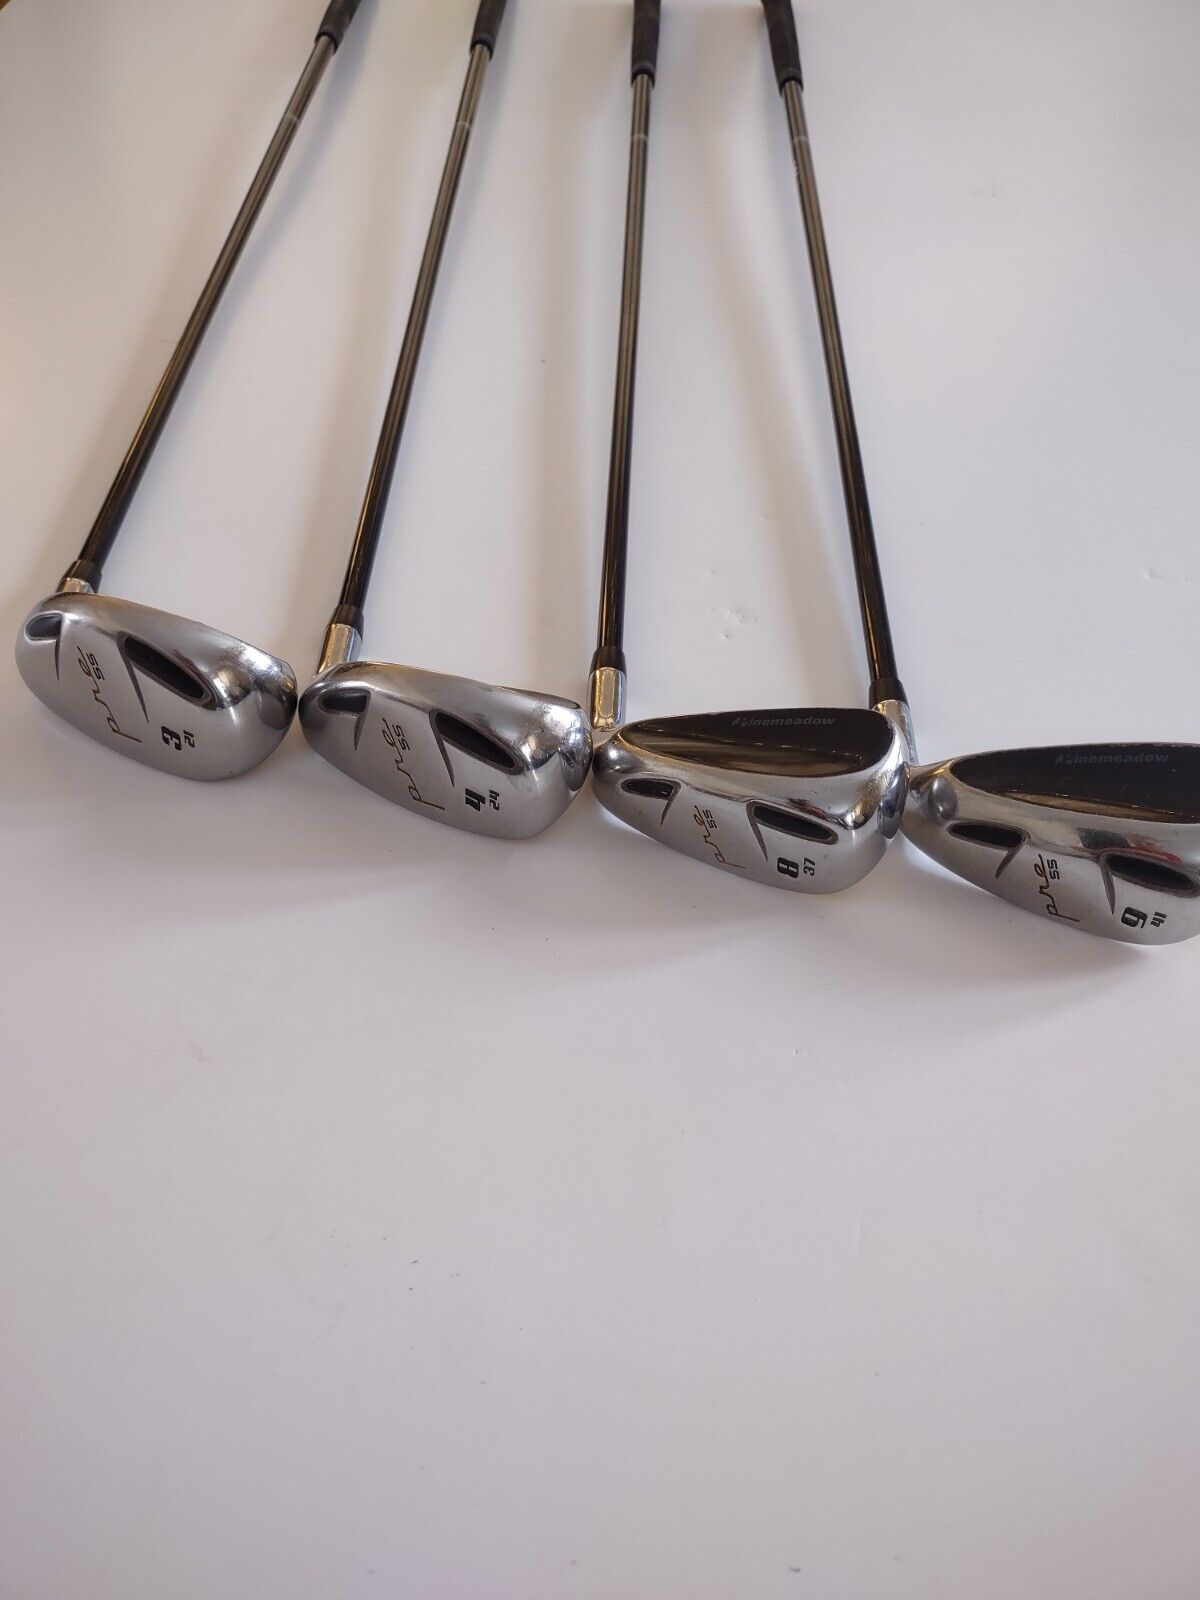 4 PineMeadow Hybrid Pre SS Clubs, 3 4 8 and 9 used in very good condition 